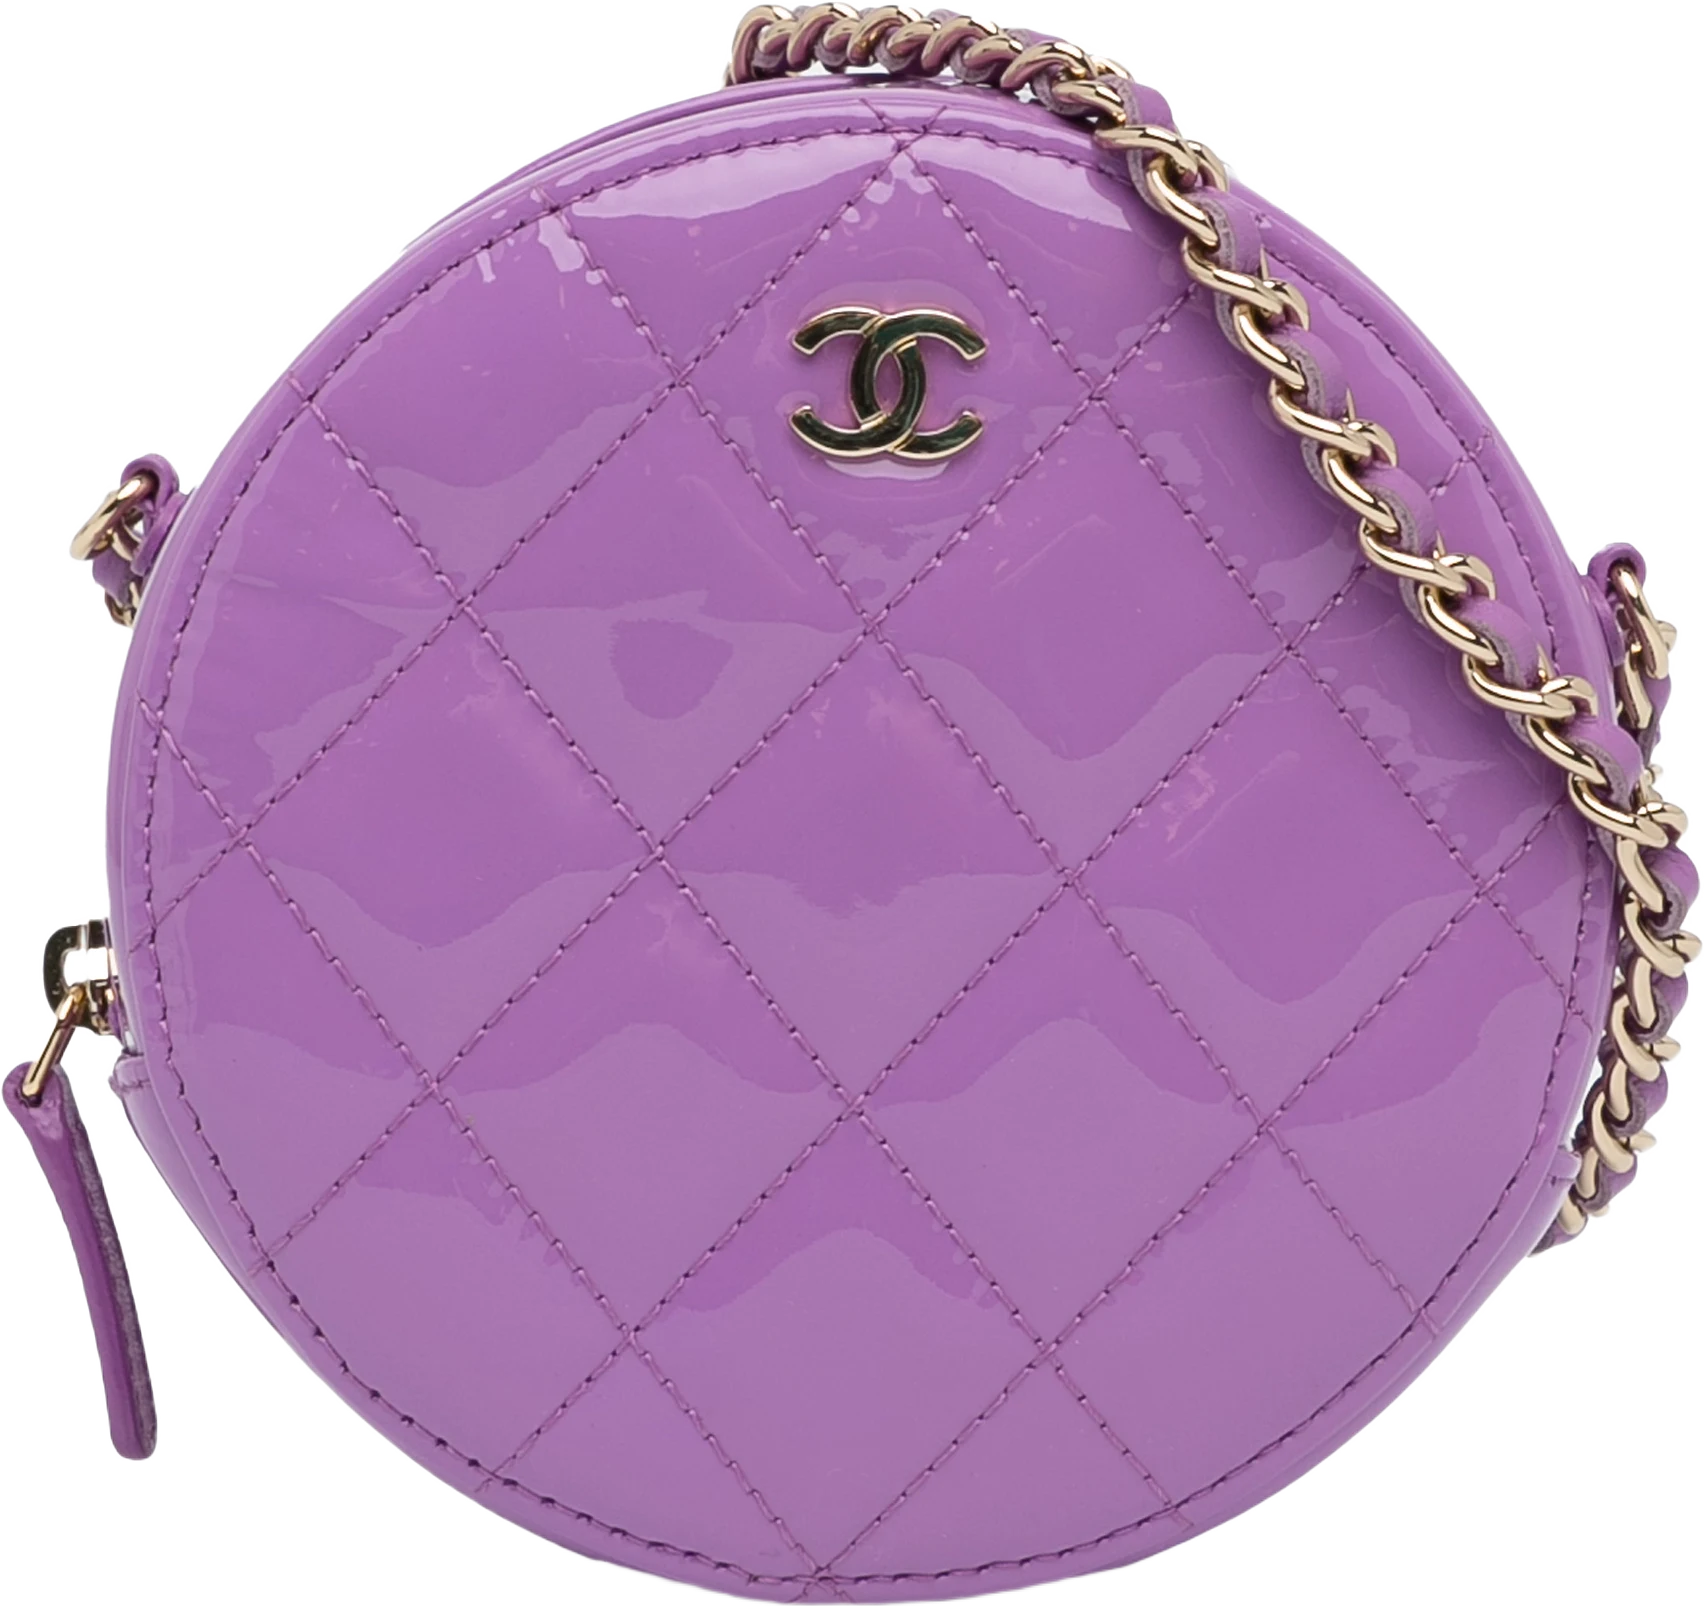 Chanel Cc Quilted Patent Round Clutch With Chain